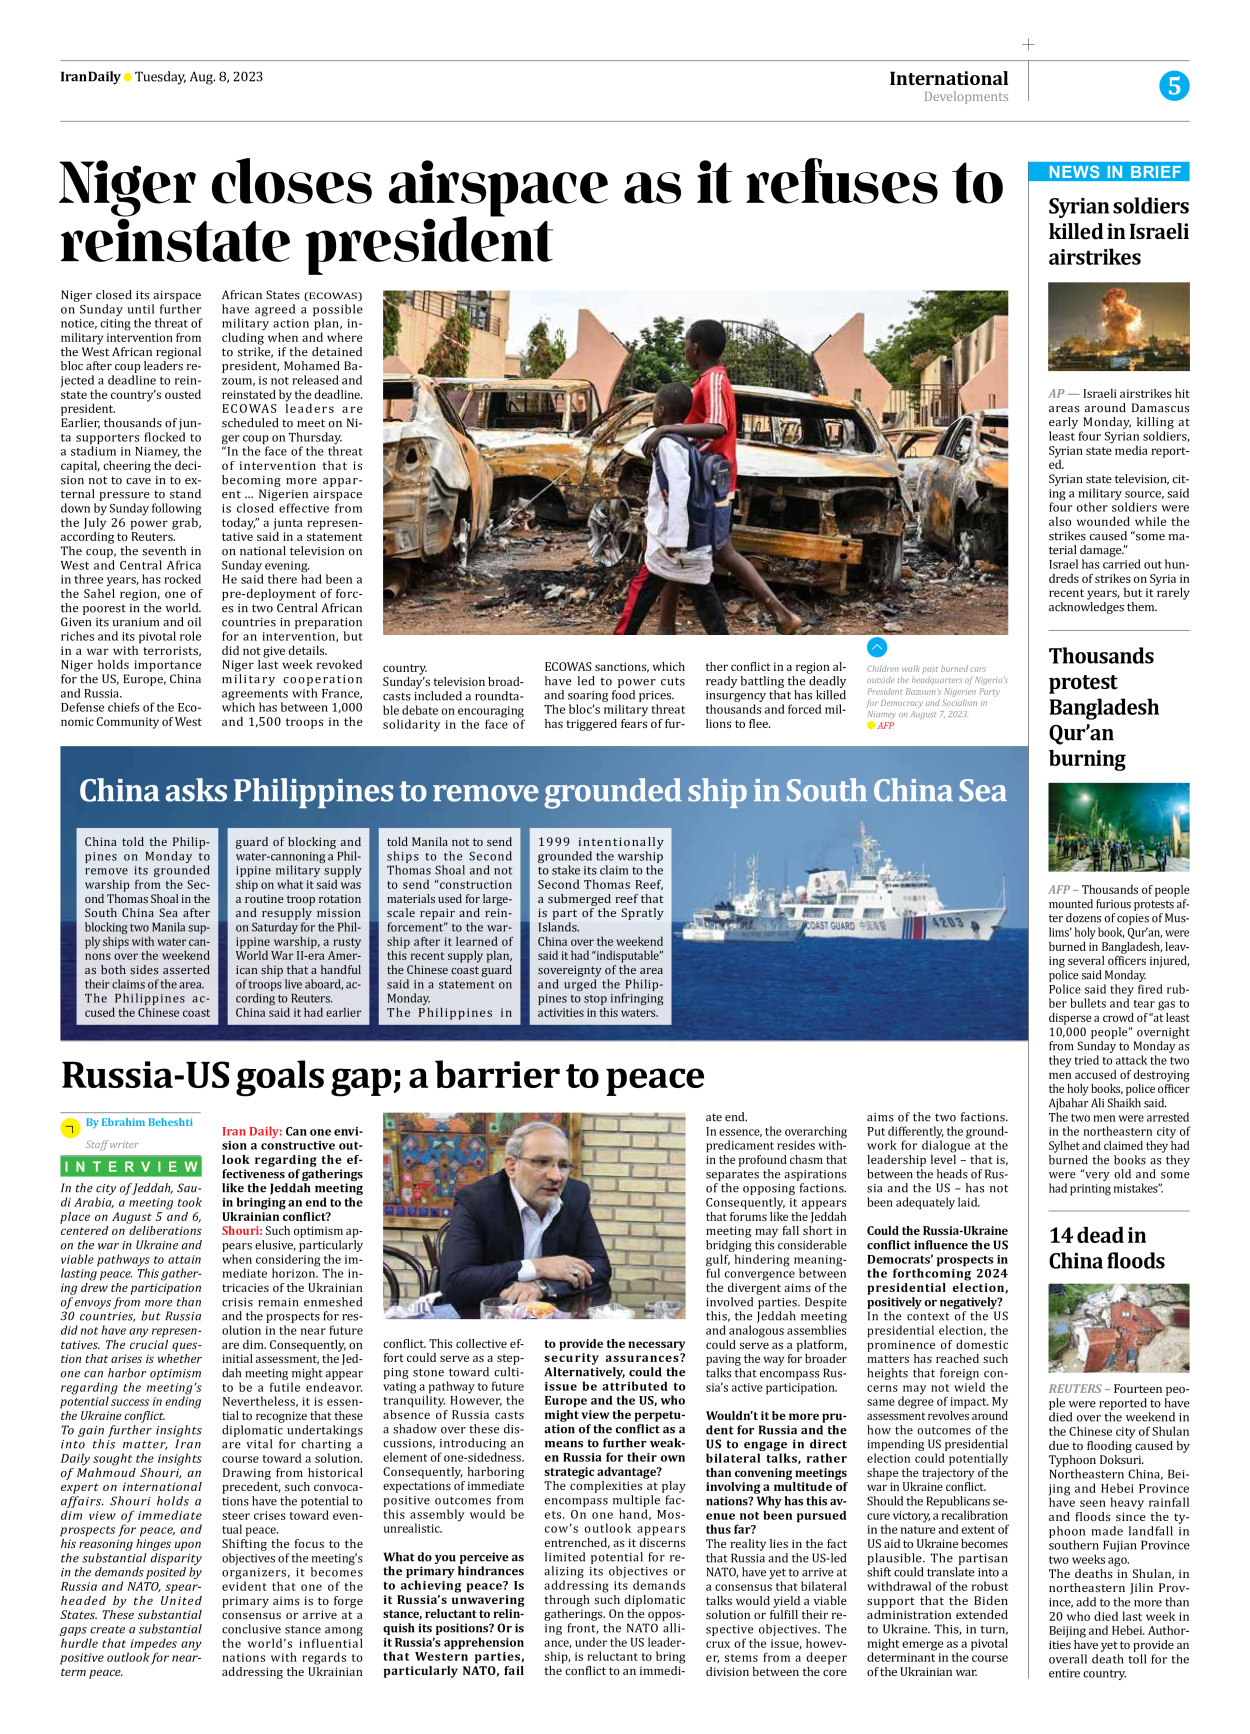 Iran Daily - Number Seven Thousand Three Hundred and Fifty Seven - 08 August 2023 - Page 5